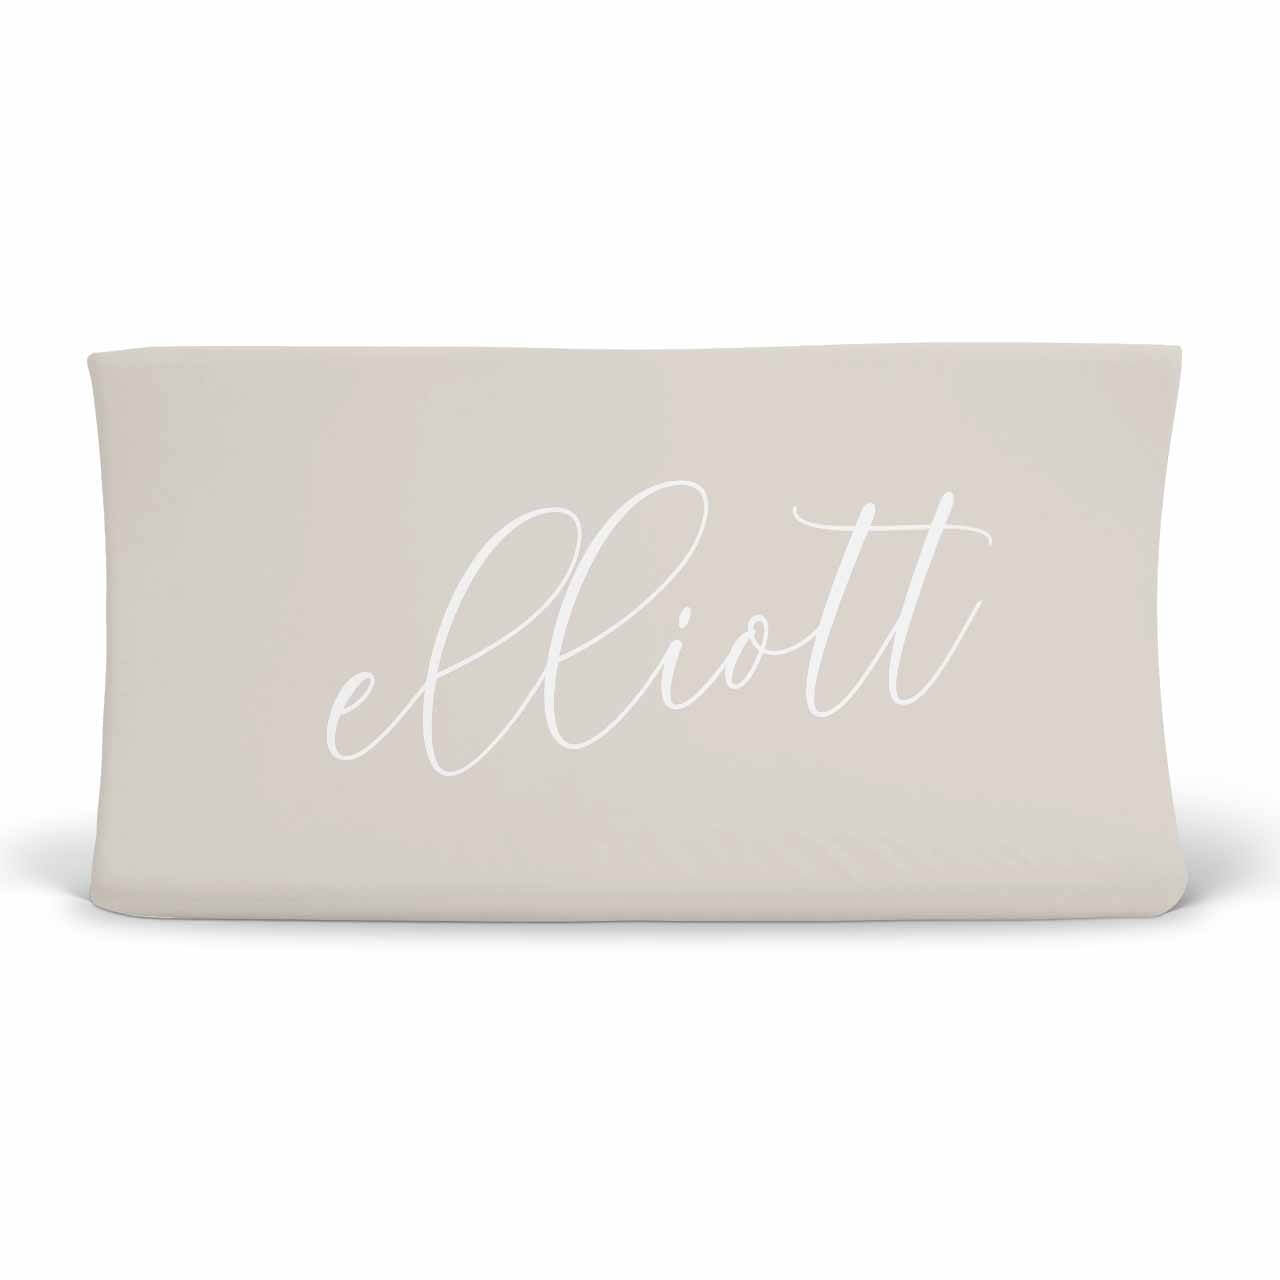 Personalized Soft Taupe Sand Color Jersey Knit Changing Pad Cover in Script